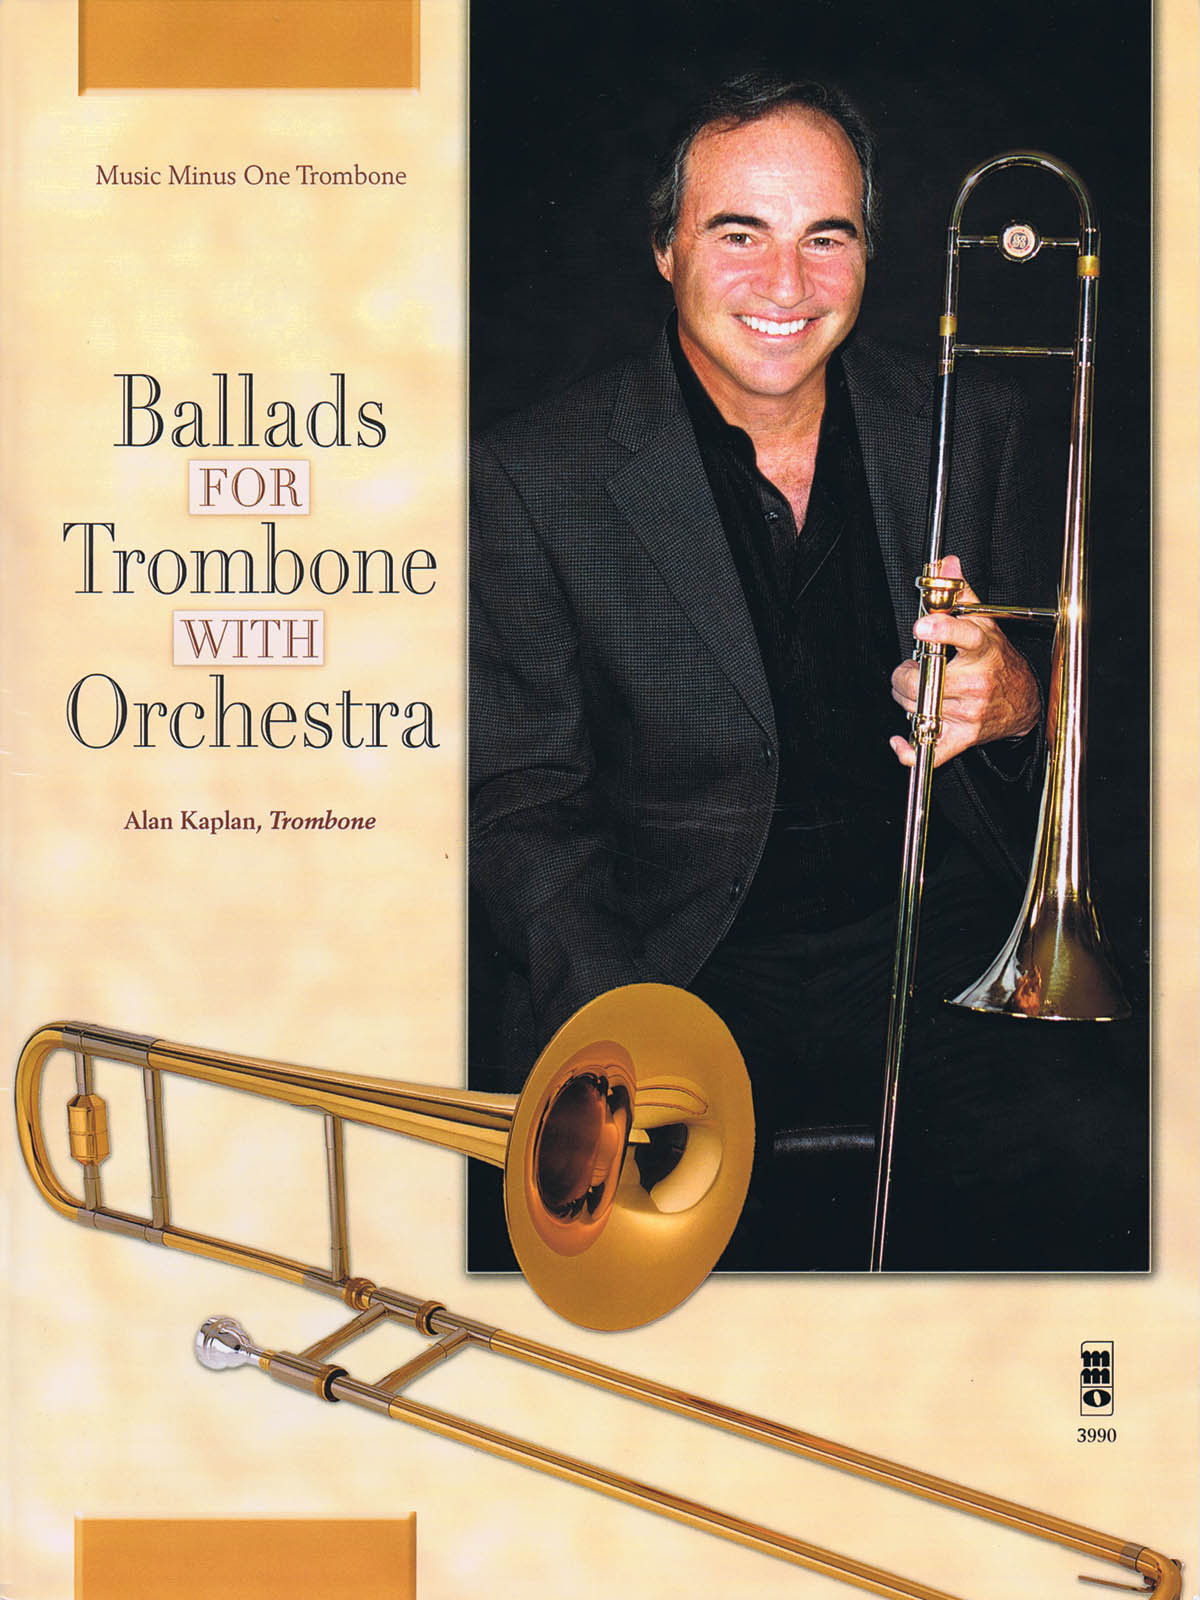 Ballads for Trombone with Orchestra